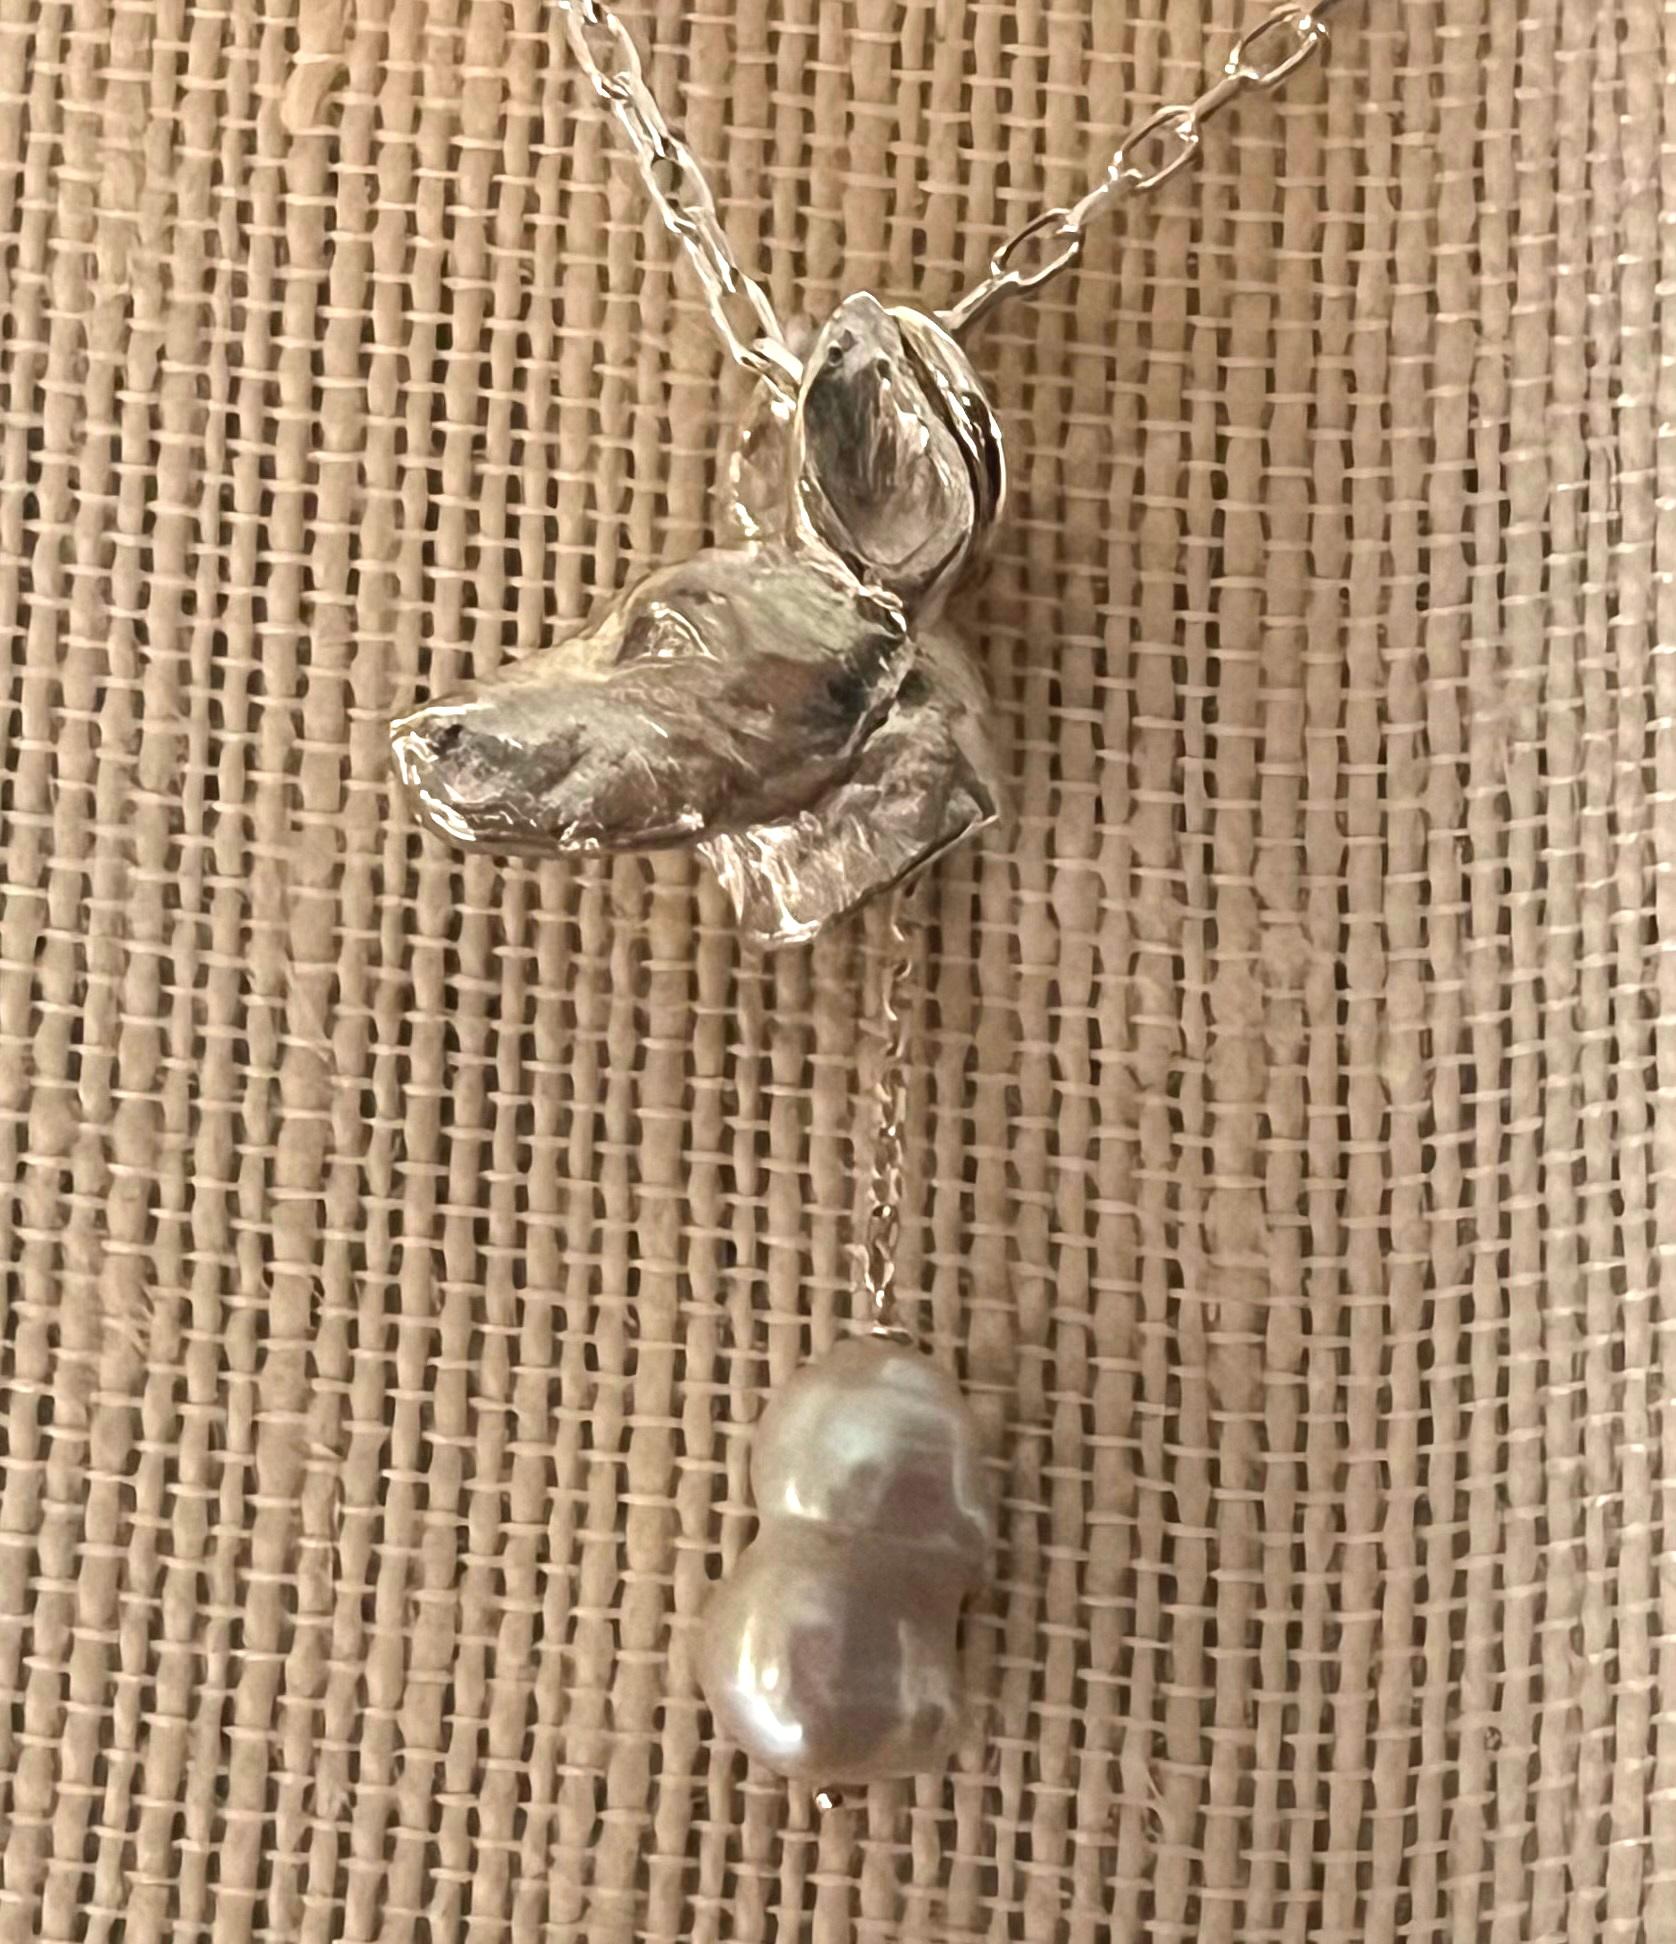     Miniature wildlife artist, Paul Eaton from England, hand sculpted a sterling silver Doberman dog head pendant which is elegantly framed with one or two drop freshwater pearls.    The bespoke Doberman dog sculpture is made into jewelry you can